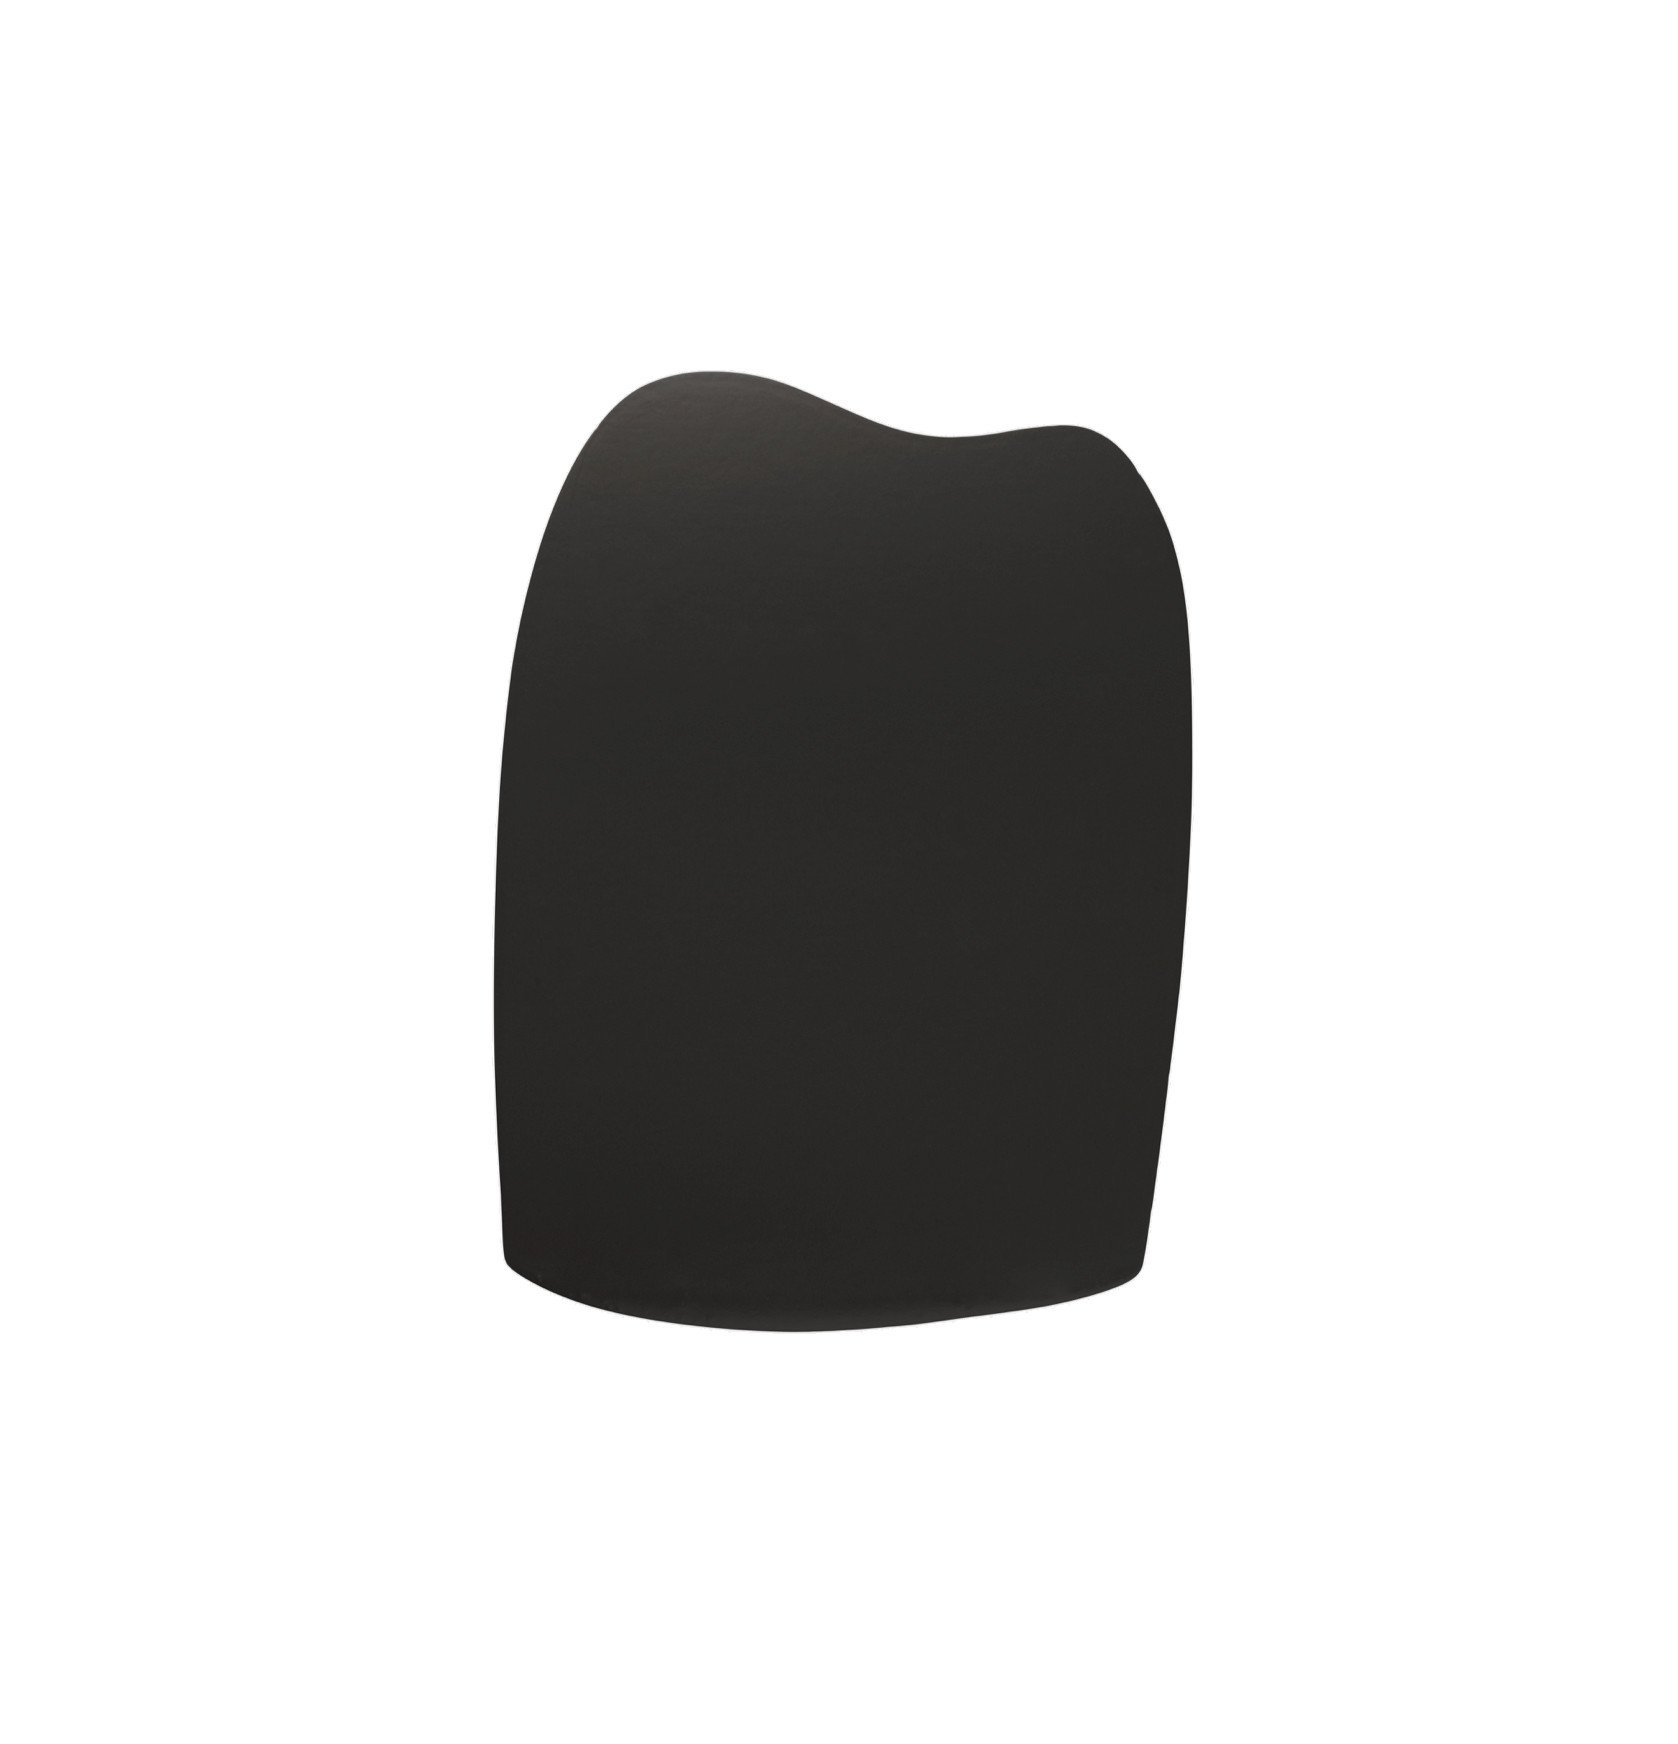 Clare Paint - Blackish  - Wall Swatch - Image 1